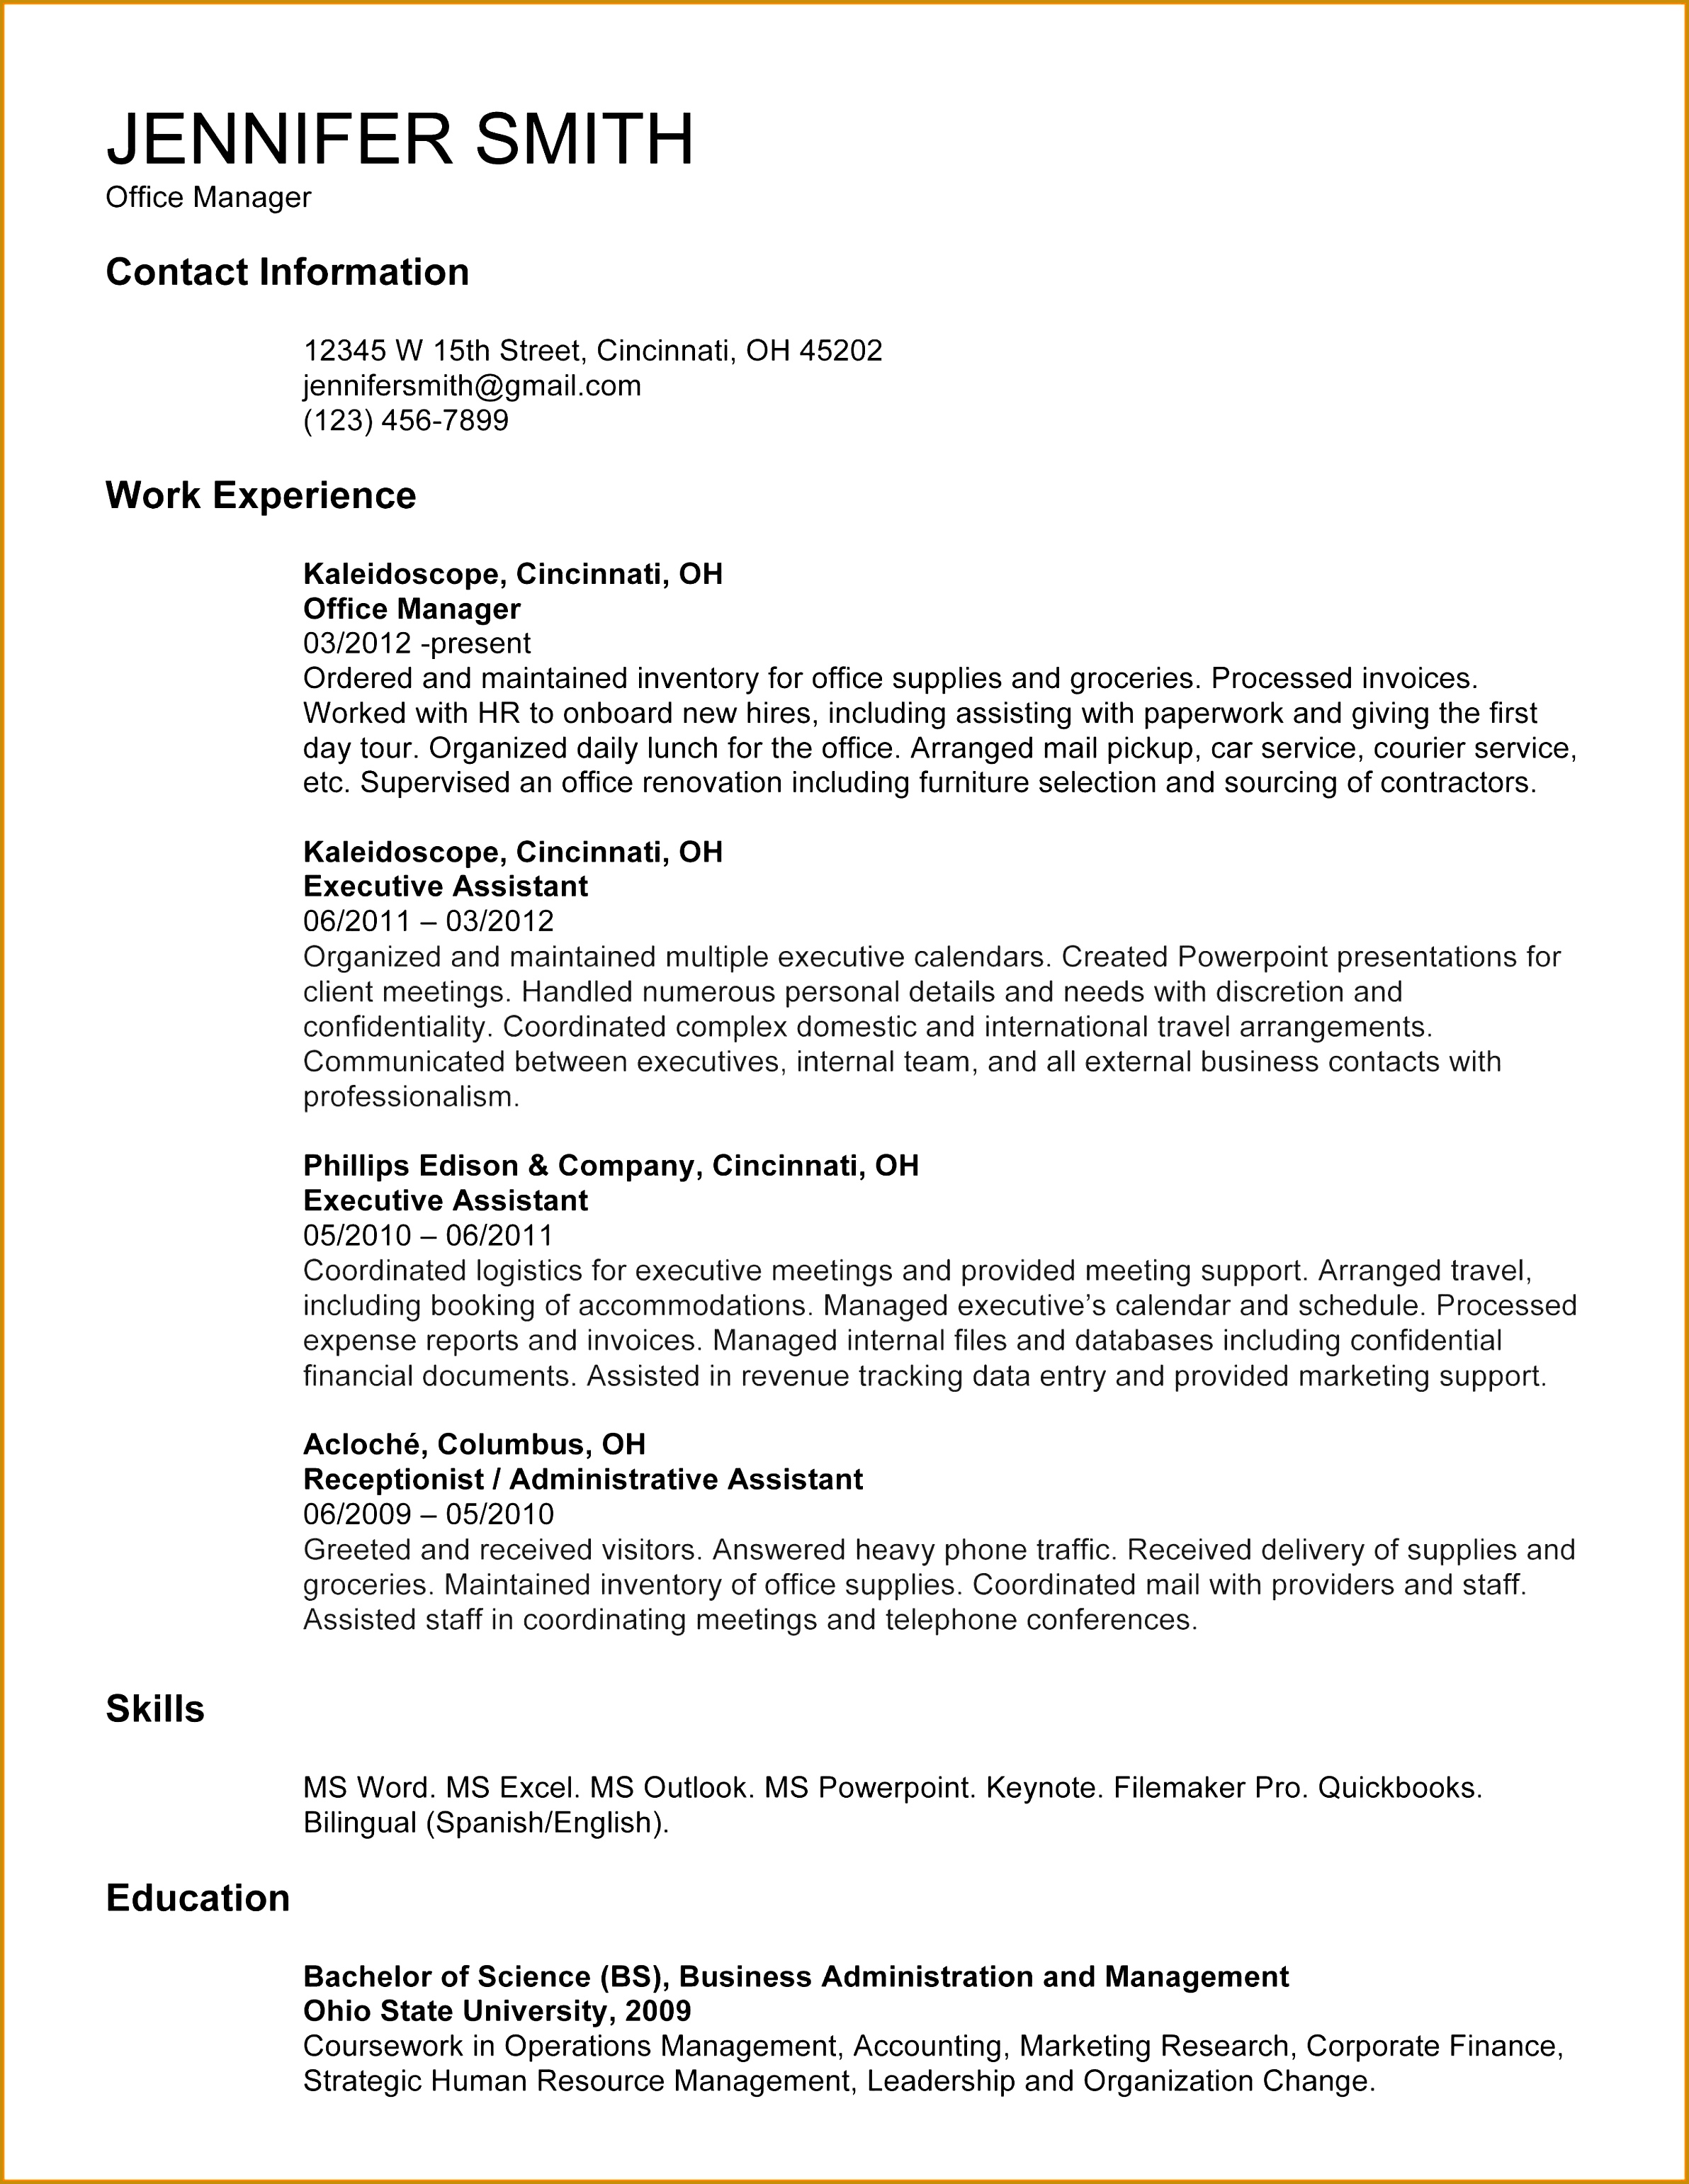 Examples Cover Letter for Resume Beautiful Administrative assistant Resume Template Od Specialist Cover Letter 30822384